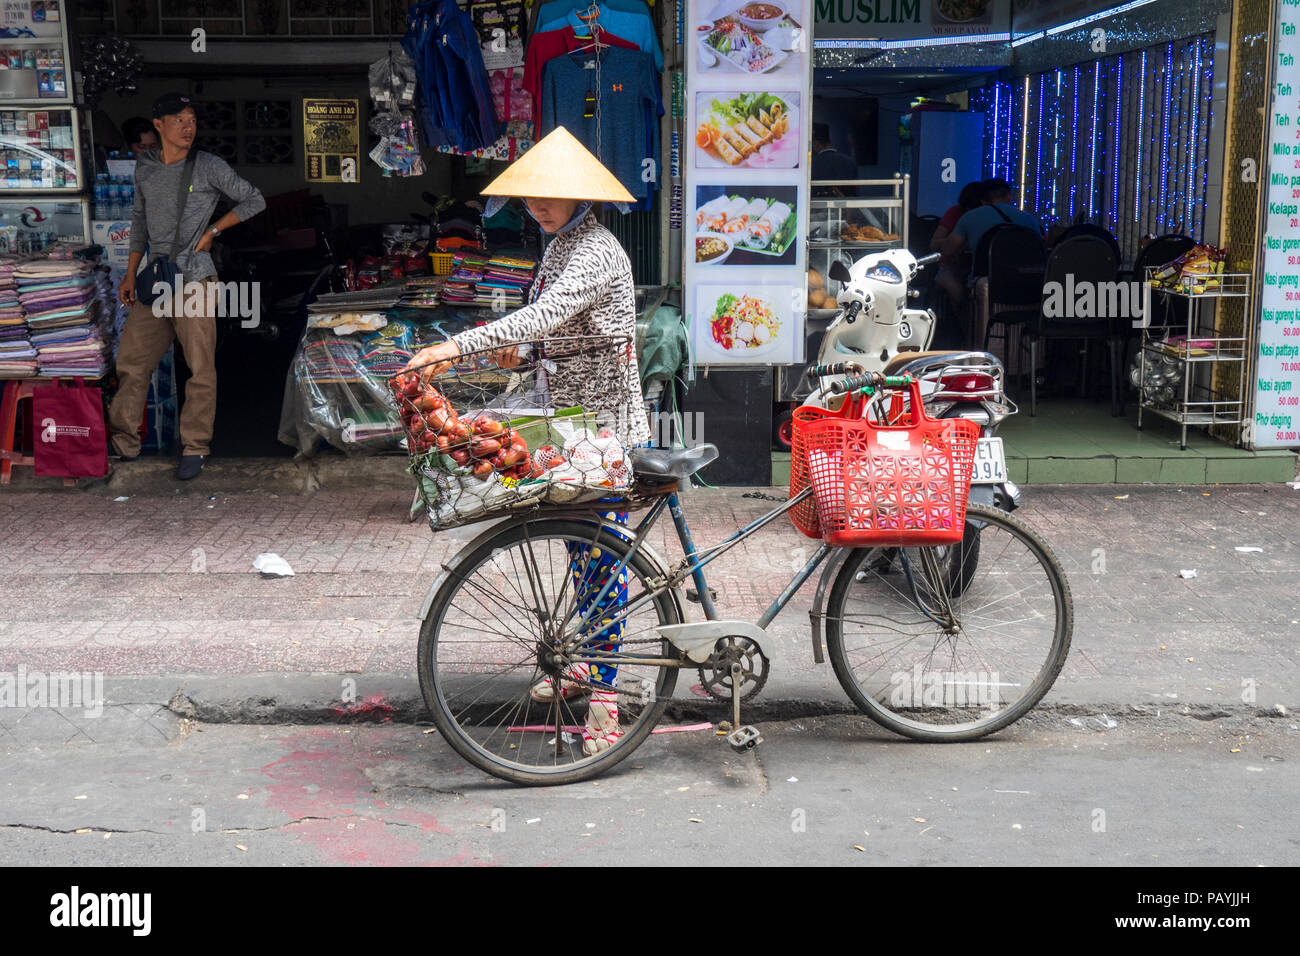 Vietnamese woman wearing a traditional straw conical hat placing her shopping in a basket on her bicycle in Ho Chi Minh City, Vietnam. Stock Photo